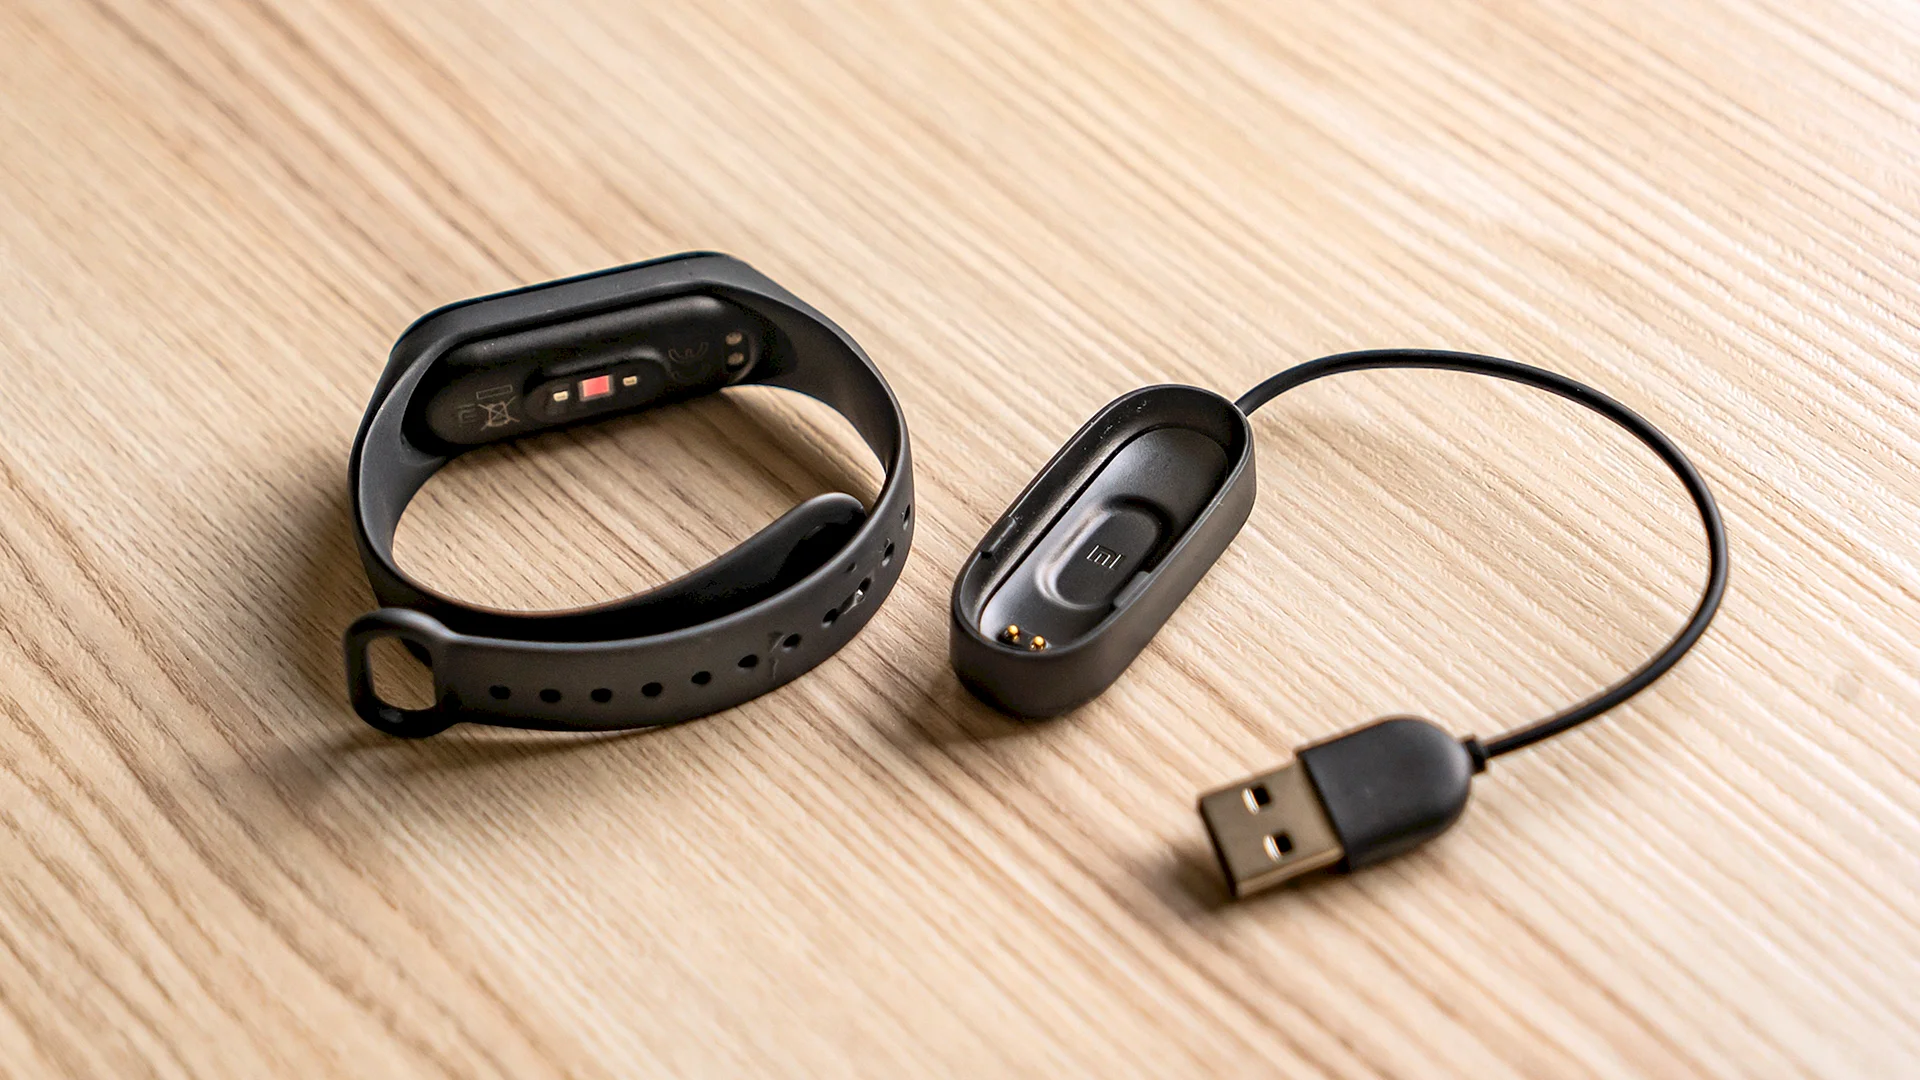 Xiaomi Mi Band 3 Charger Cable For Smart Band Charging Wallpaper